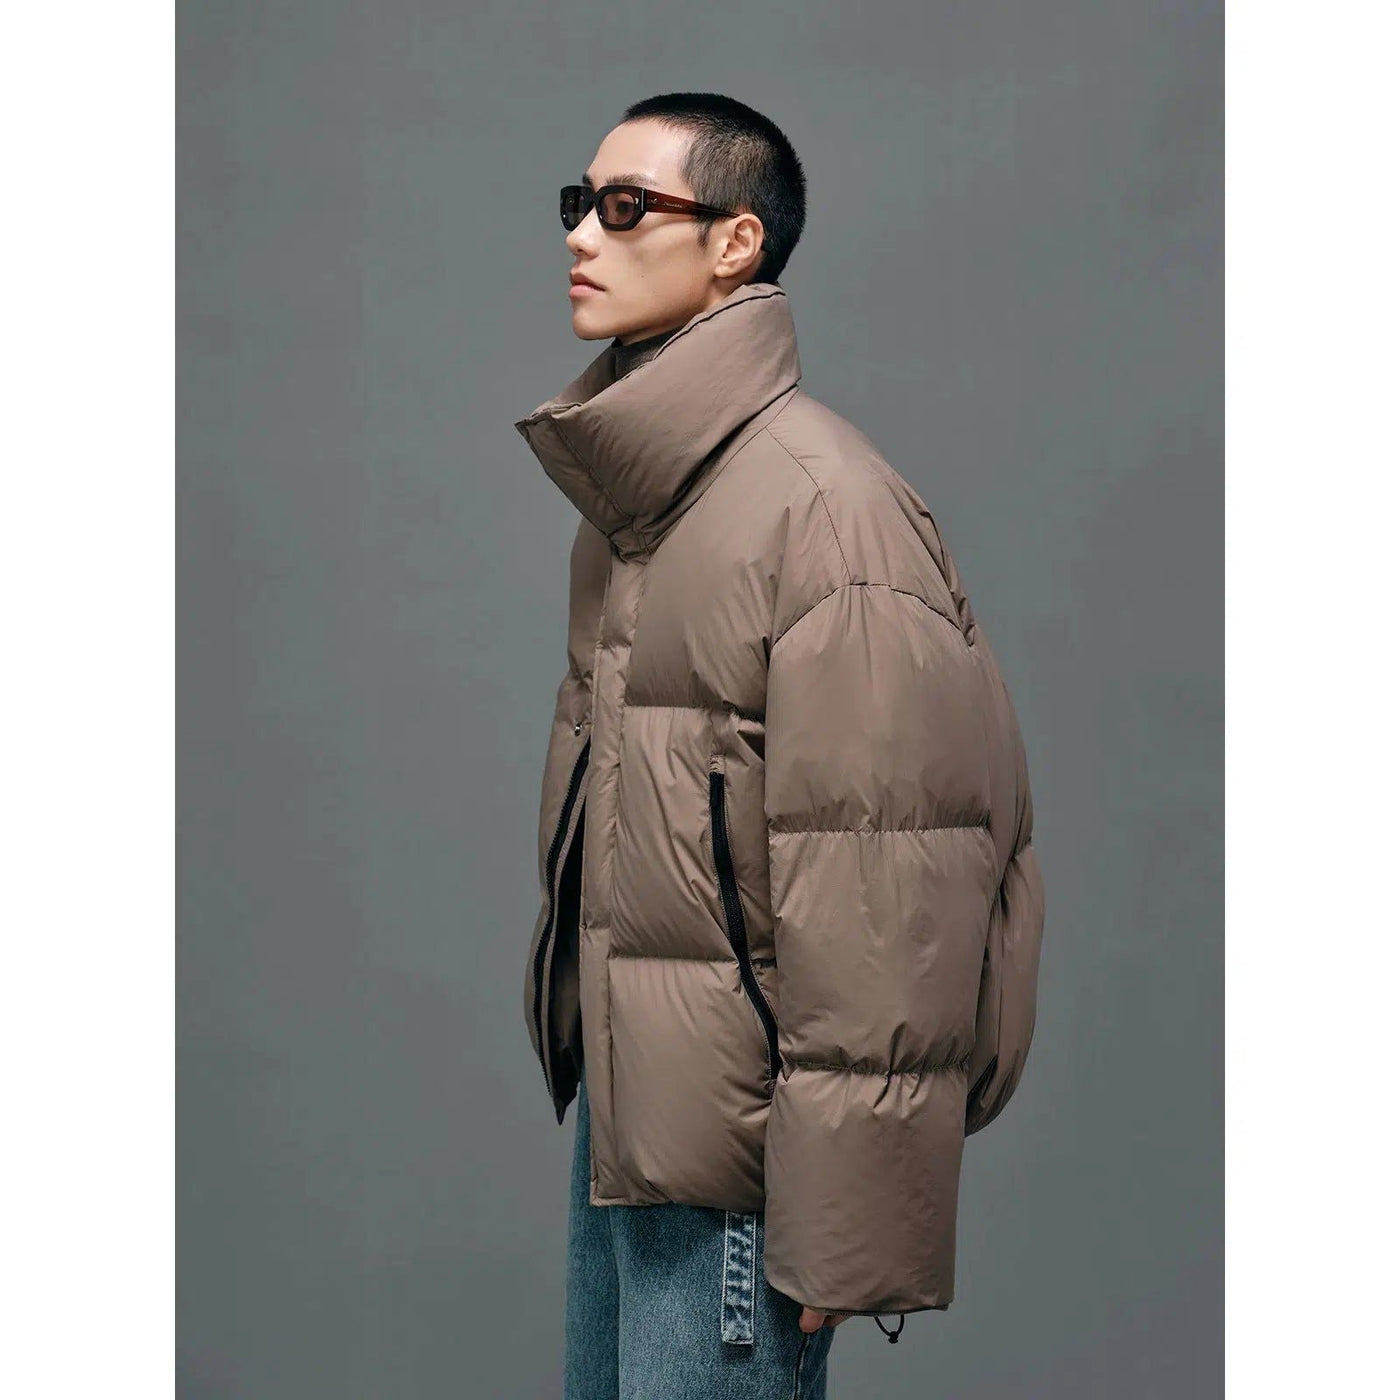 Solid Color Zipped Down Jacket Korean Street Fashion Jacket By NANS Shop Online at OH Vault